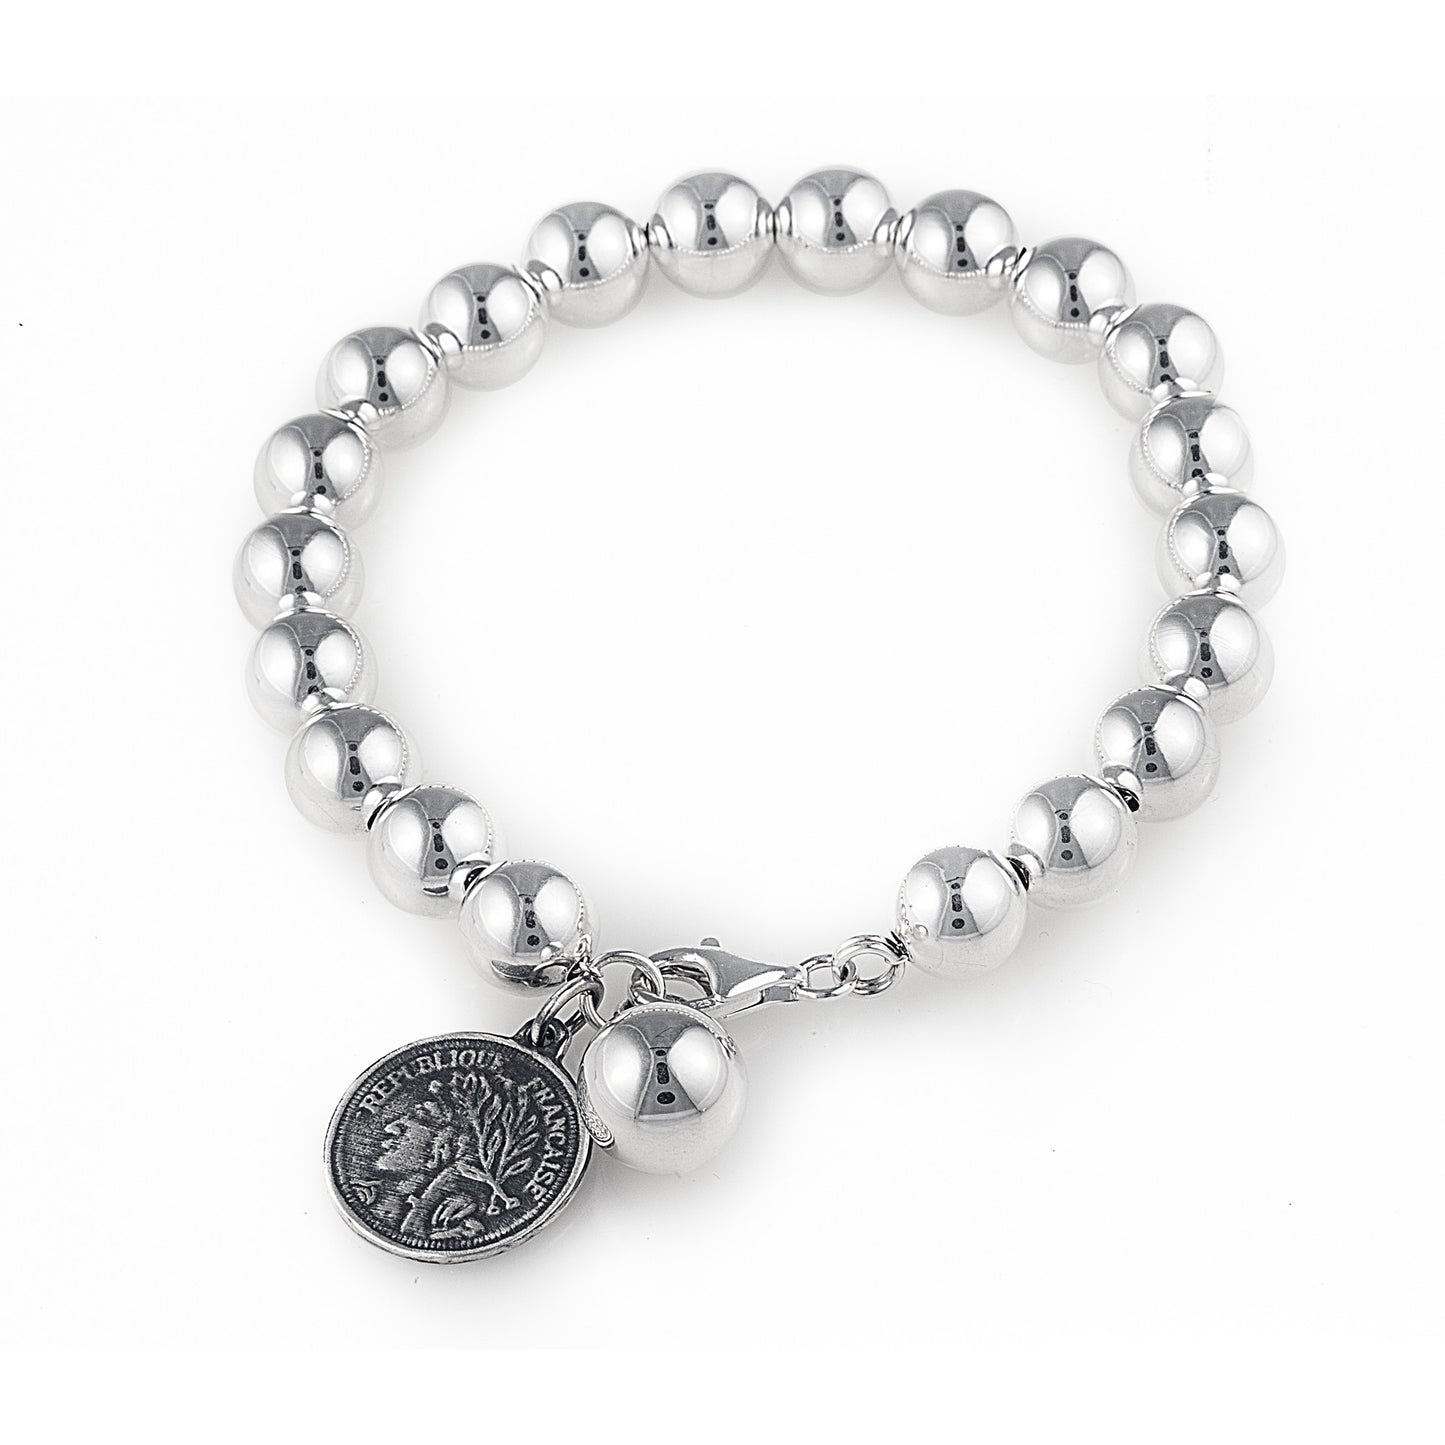 The enchanting Contessa Bracelet with Ball & Coin is crafted of 10mm 925 sterling silver beads threaded onto a sturdy chain for beauties who want a modern take on the classic pearl bracelet. Worldwide shipping.